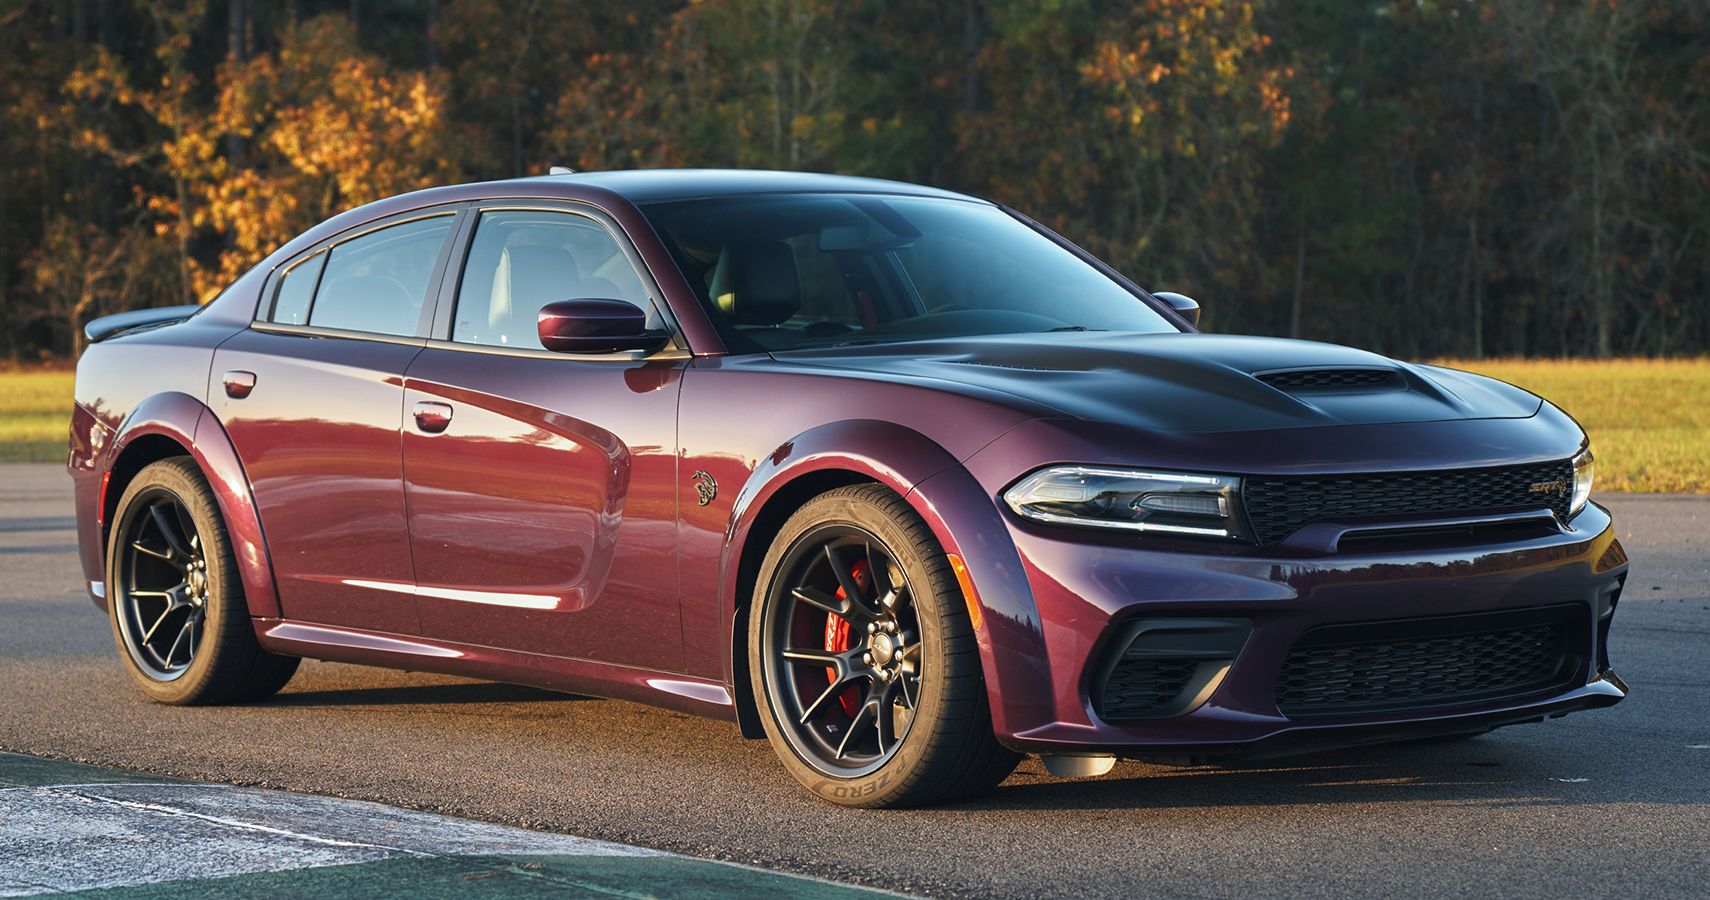 2021 Dodge Charger SRT Hellcat Redeye in Hellraisin with the Satin Black Hood, Roof and Decklid.